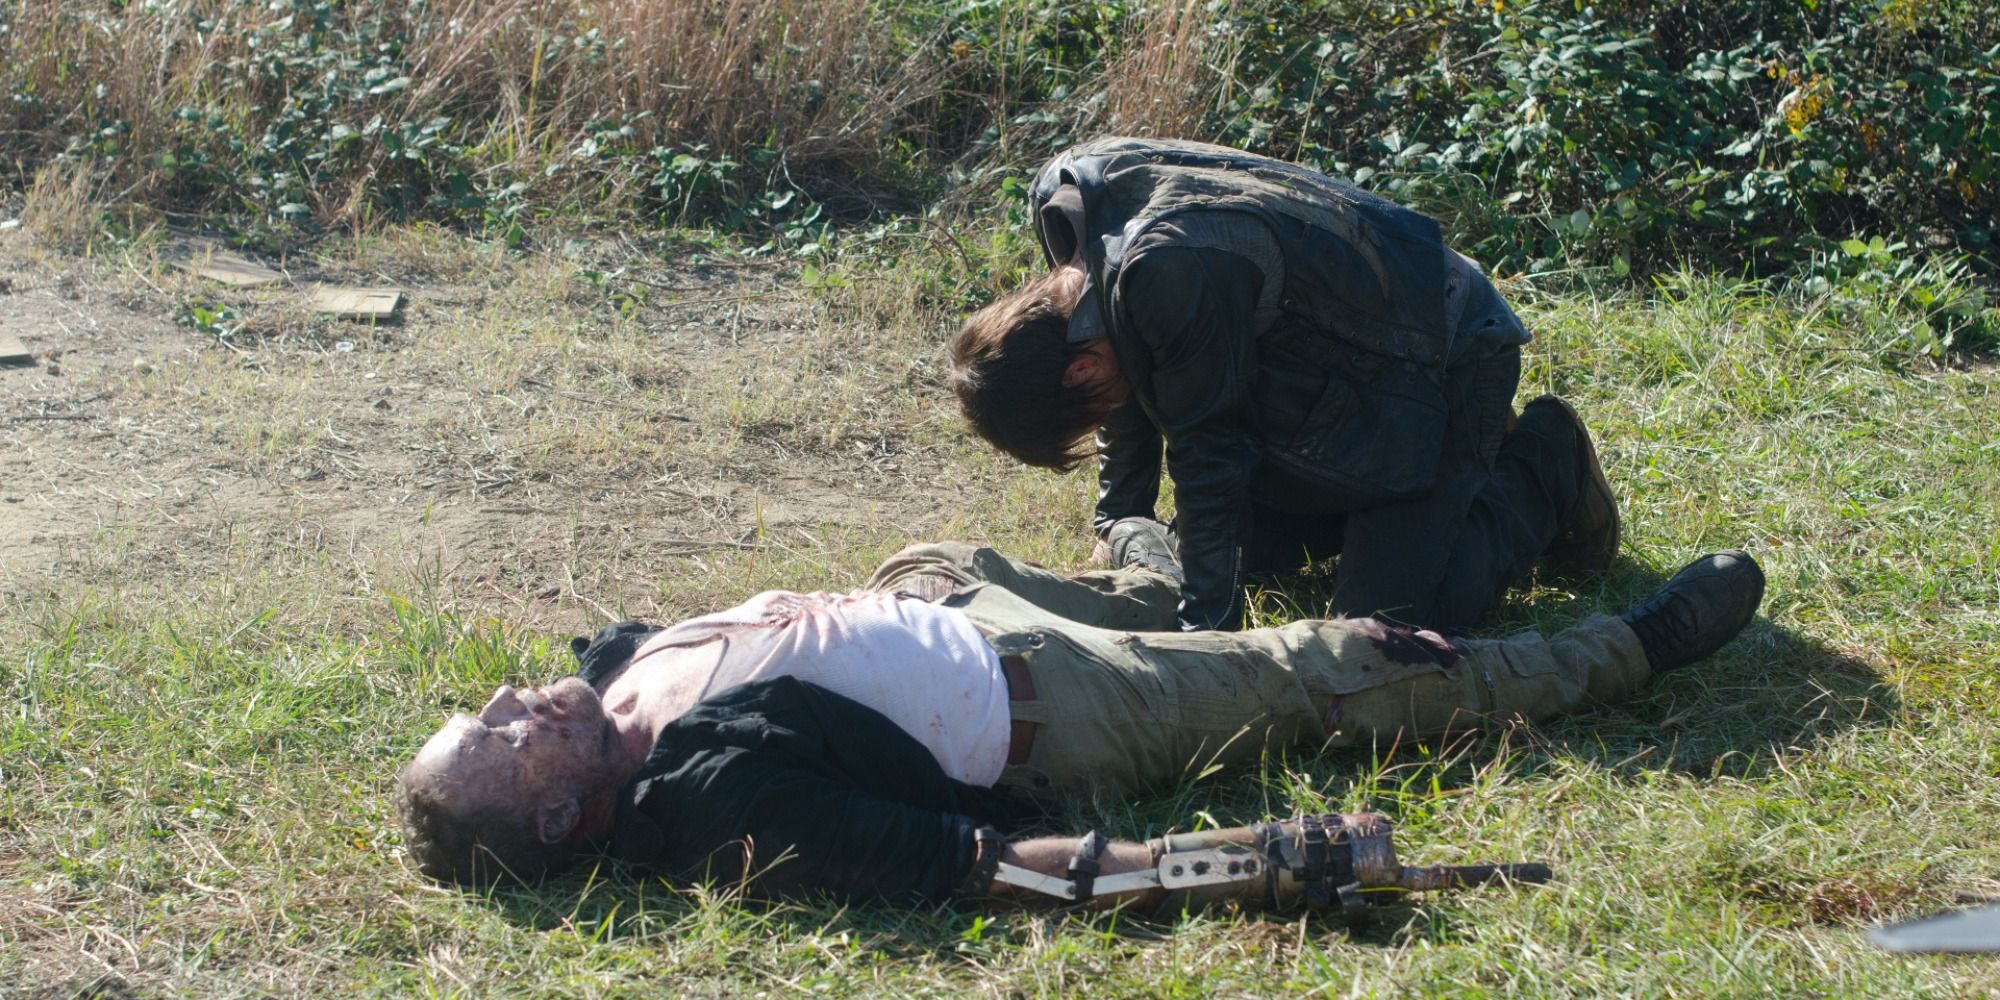 Daryl cries over Merle's body on The Walking Dead